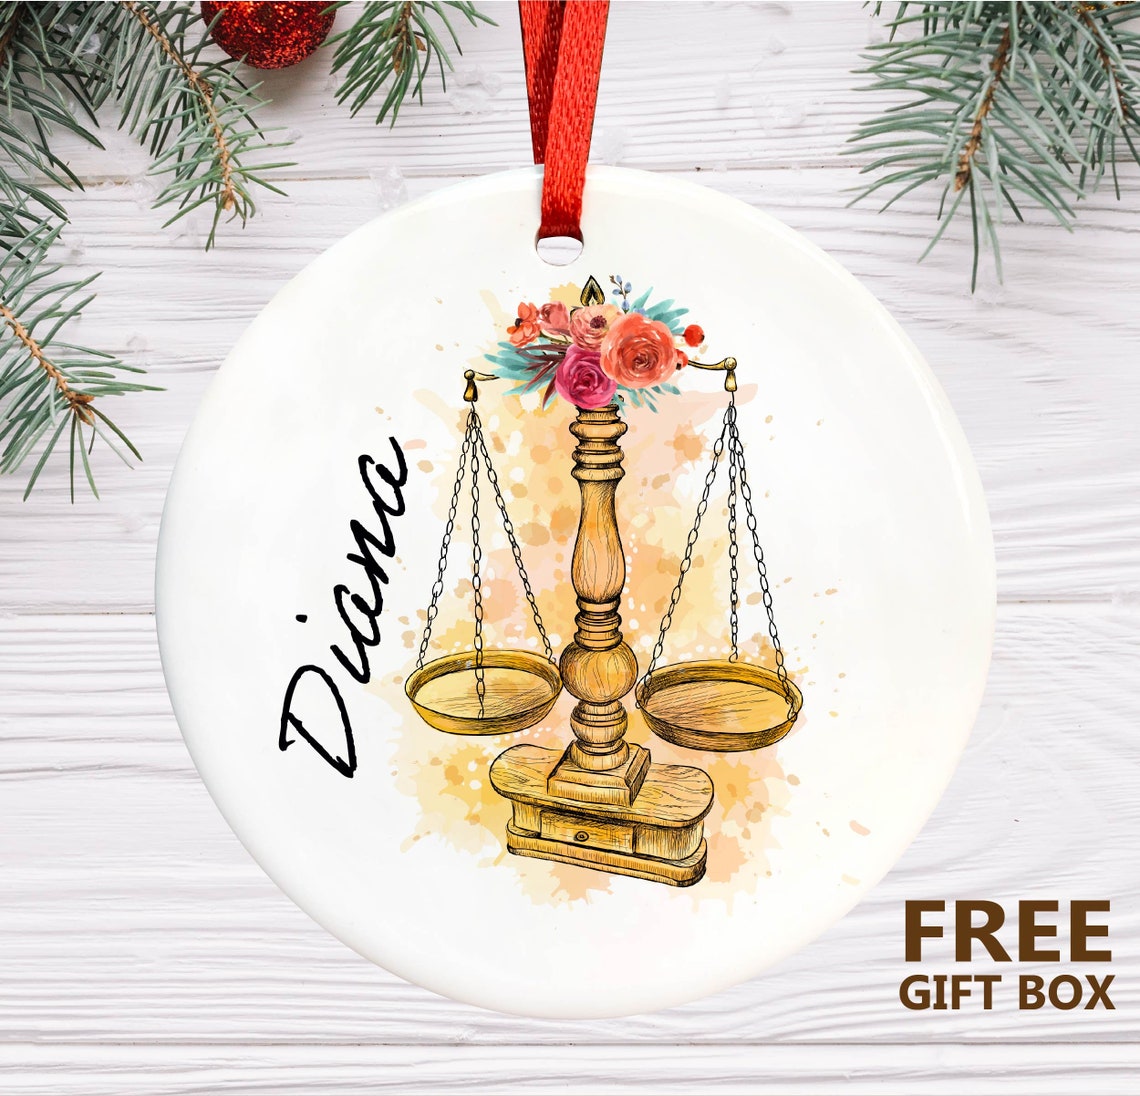 Personalized Lawyer Ceramic Ornament –Law Student Gift - Attorney Paralegal Ornament Gift